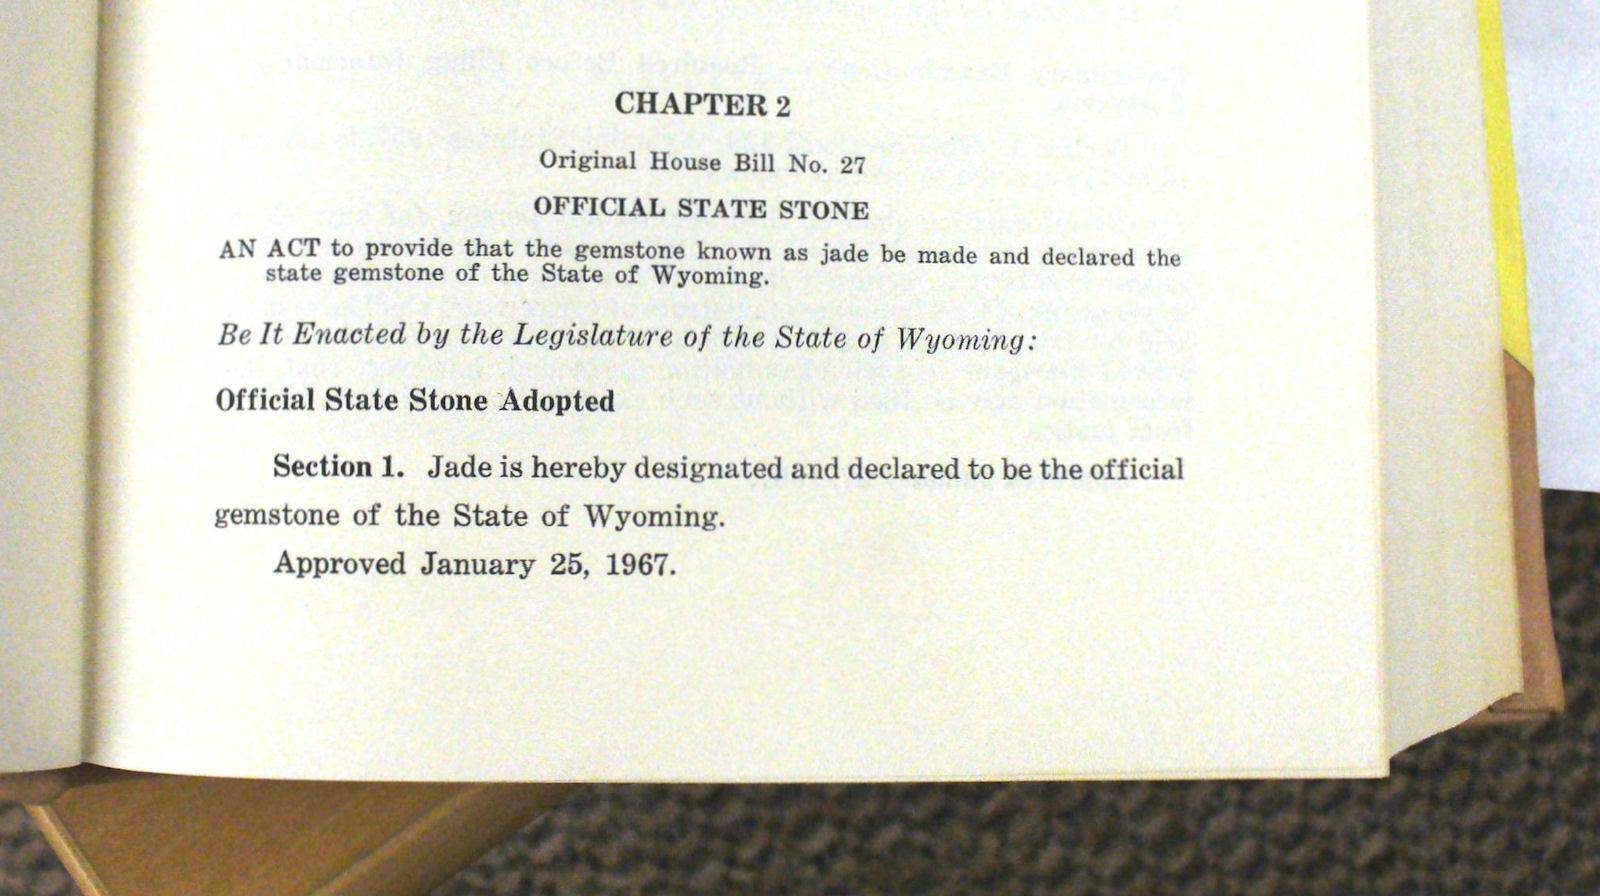 Laws of the State of Wyoming.